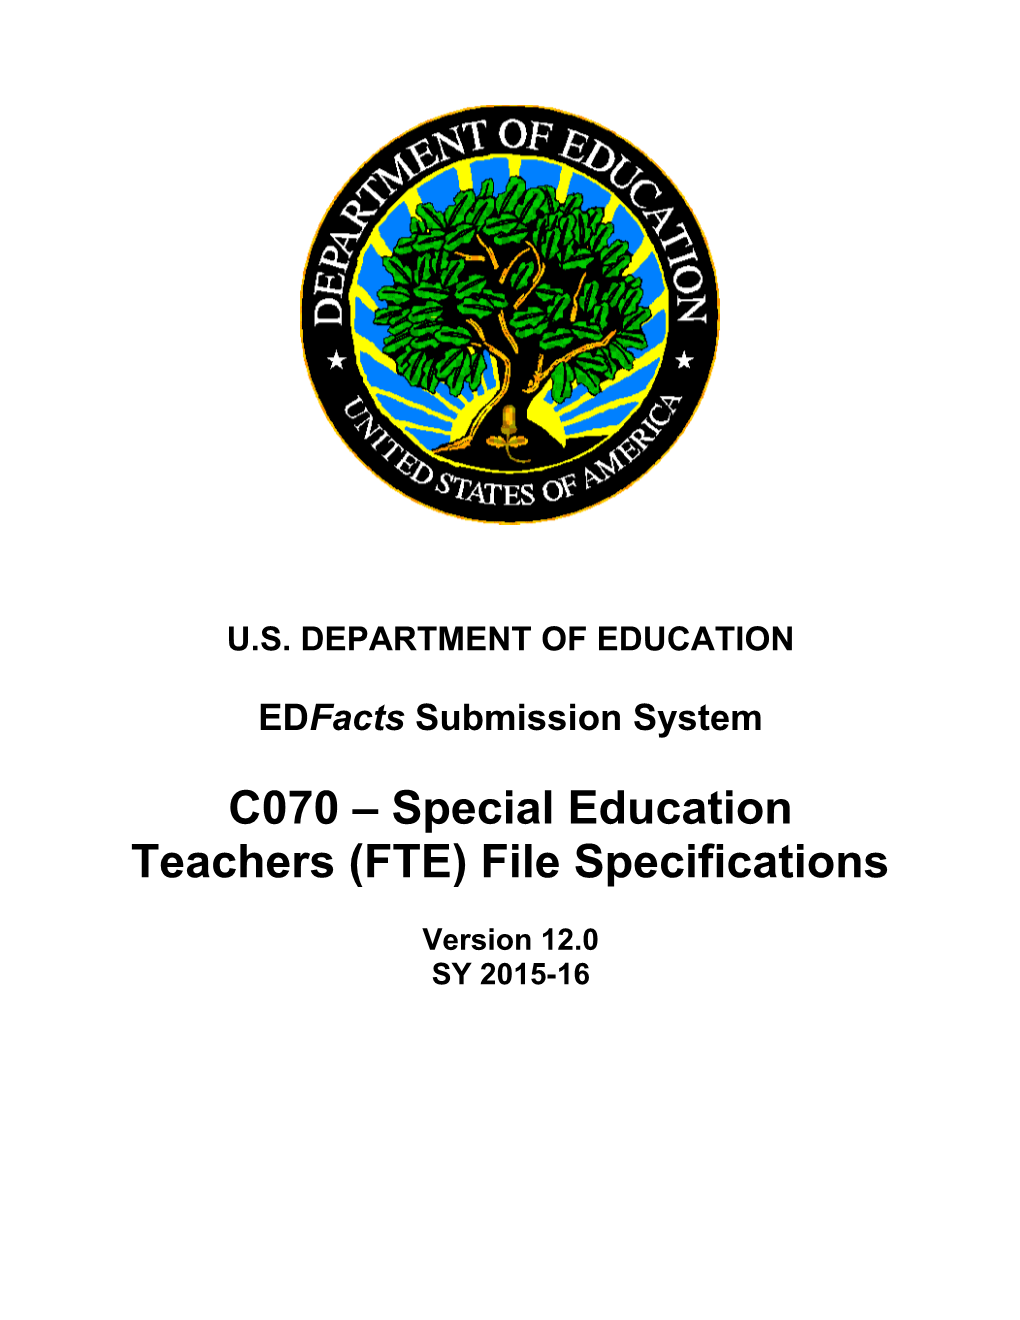 Special Education Teachers (FTE) File Specifications (Msword)